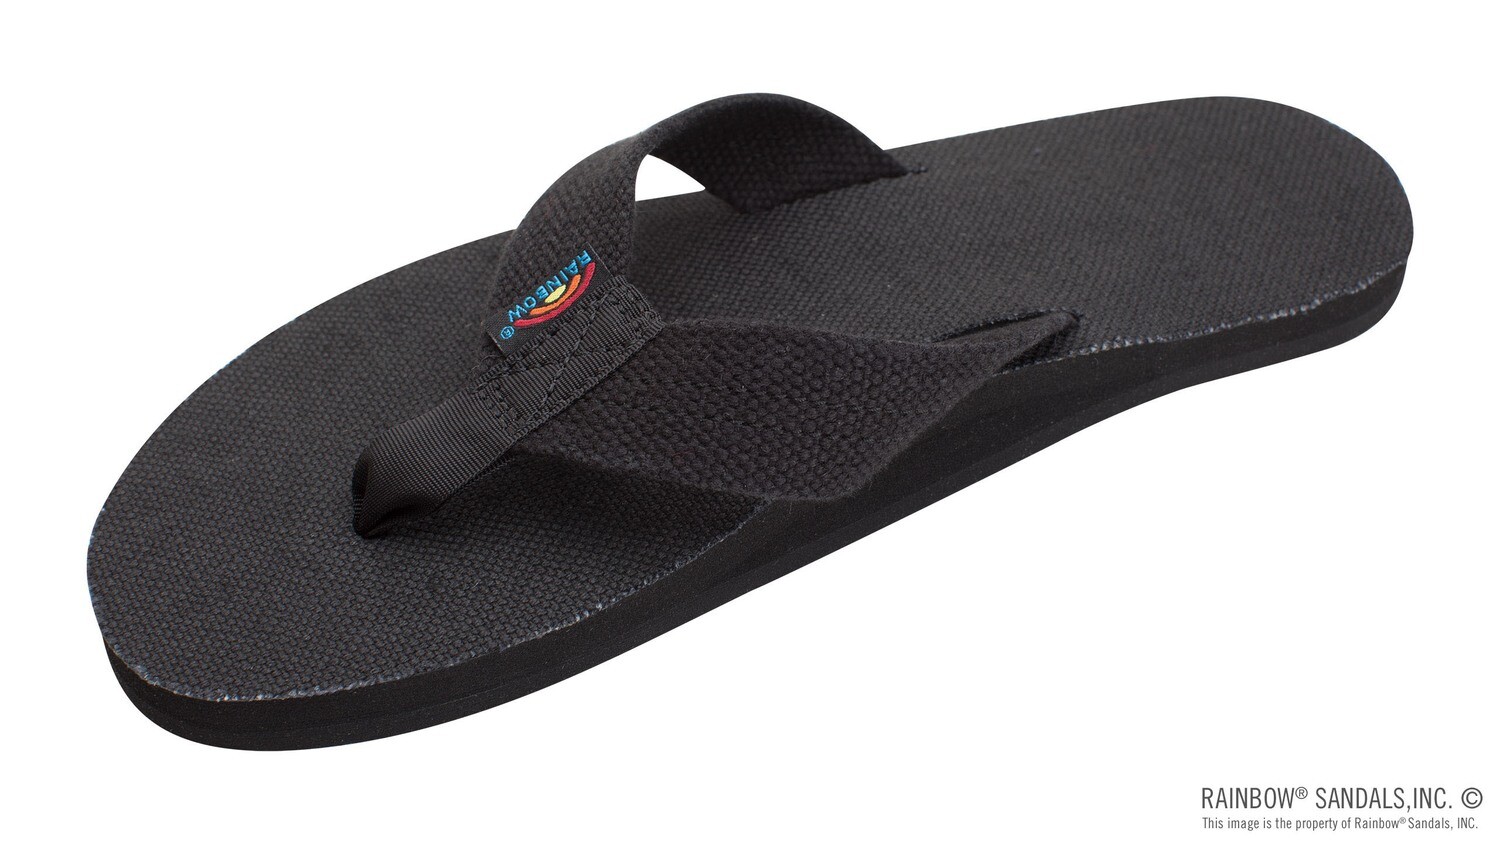 Rainbow Sandals - Single Layer Hemp Top and Strap with Arch Support Men's